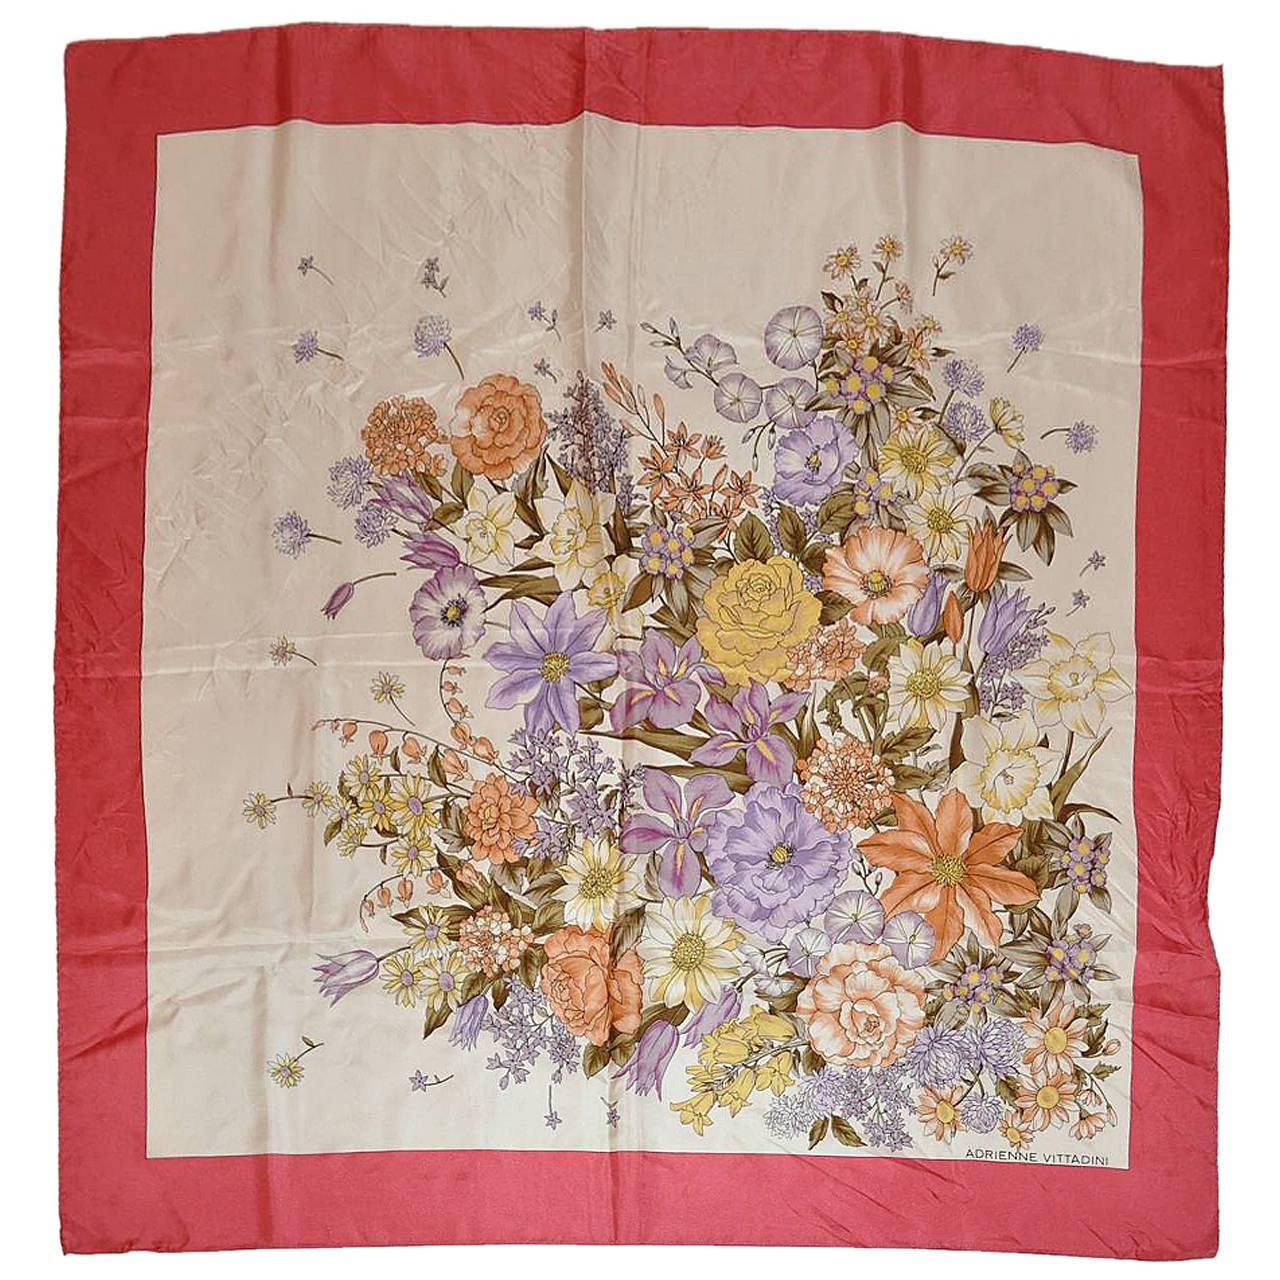 Adrienne Vittadini Multi-Color Floral Silk Scarf with Rose Borders For Sale